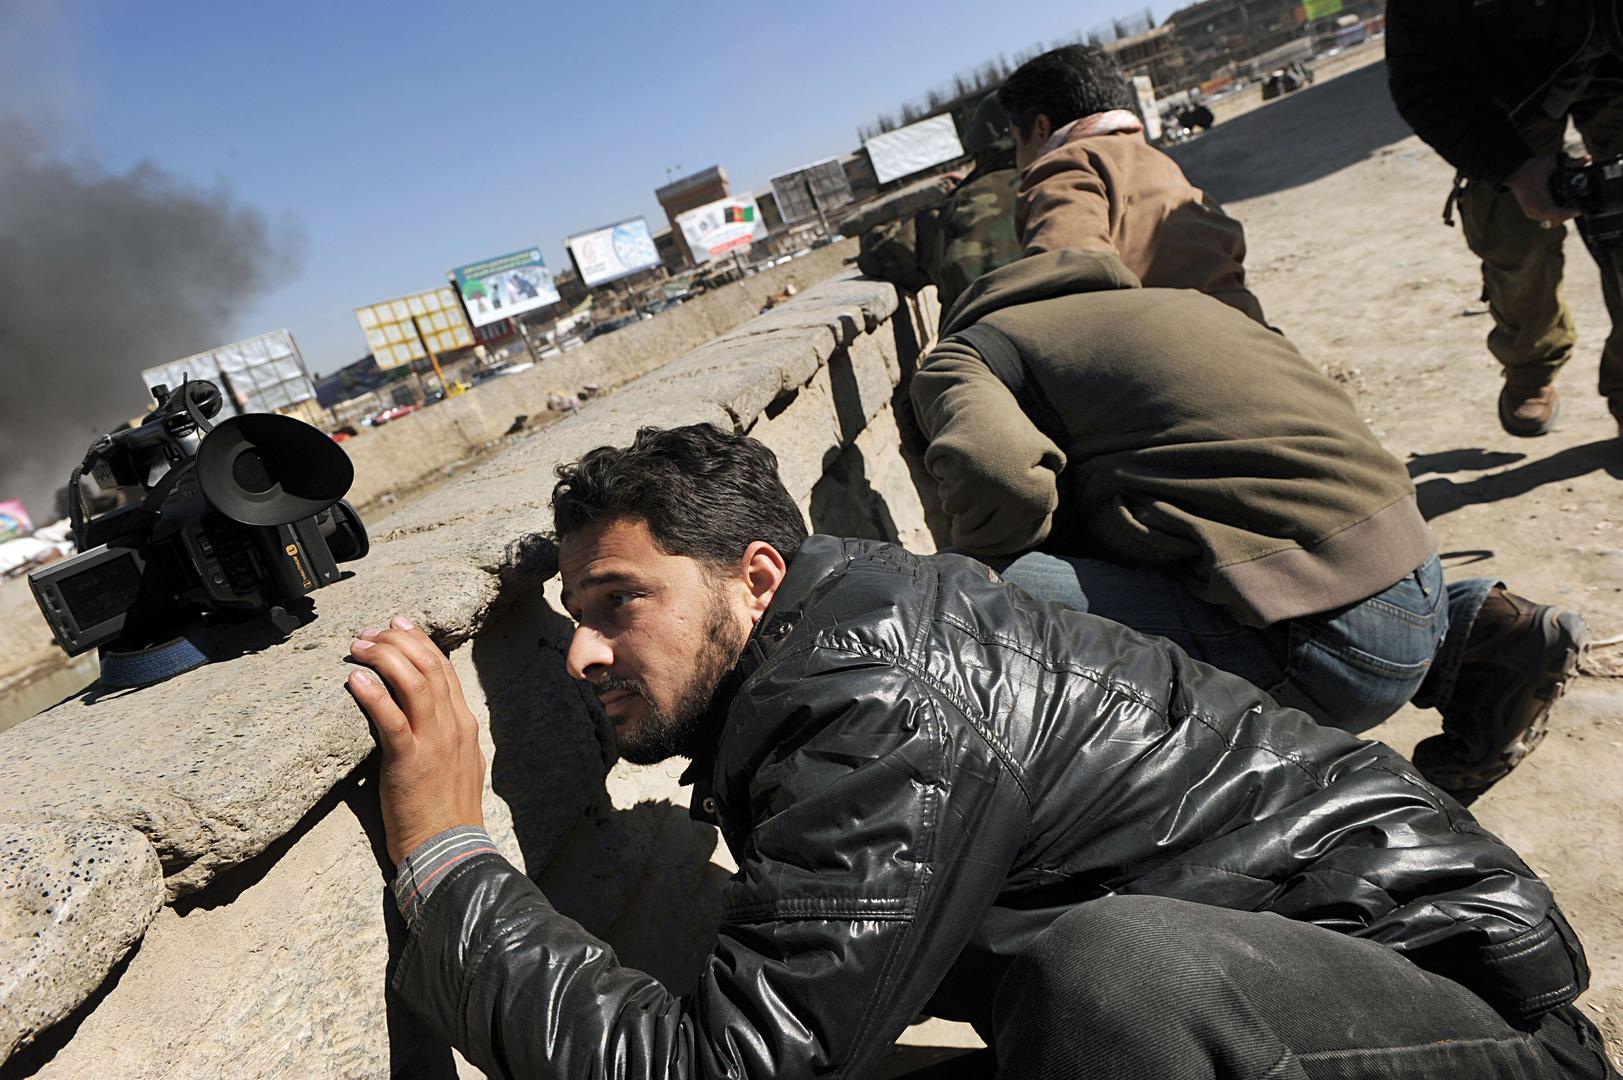 Afghan journalists seek cover in Kabul on Jan. 18, 2010 during a series of co-ordinated attacks by Taliban militants in the Afghan capital that killed at least 10 people and injured 32.